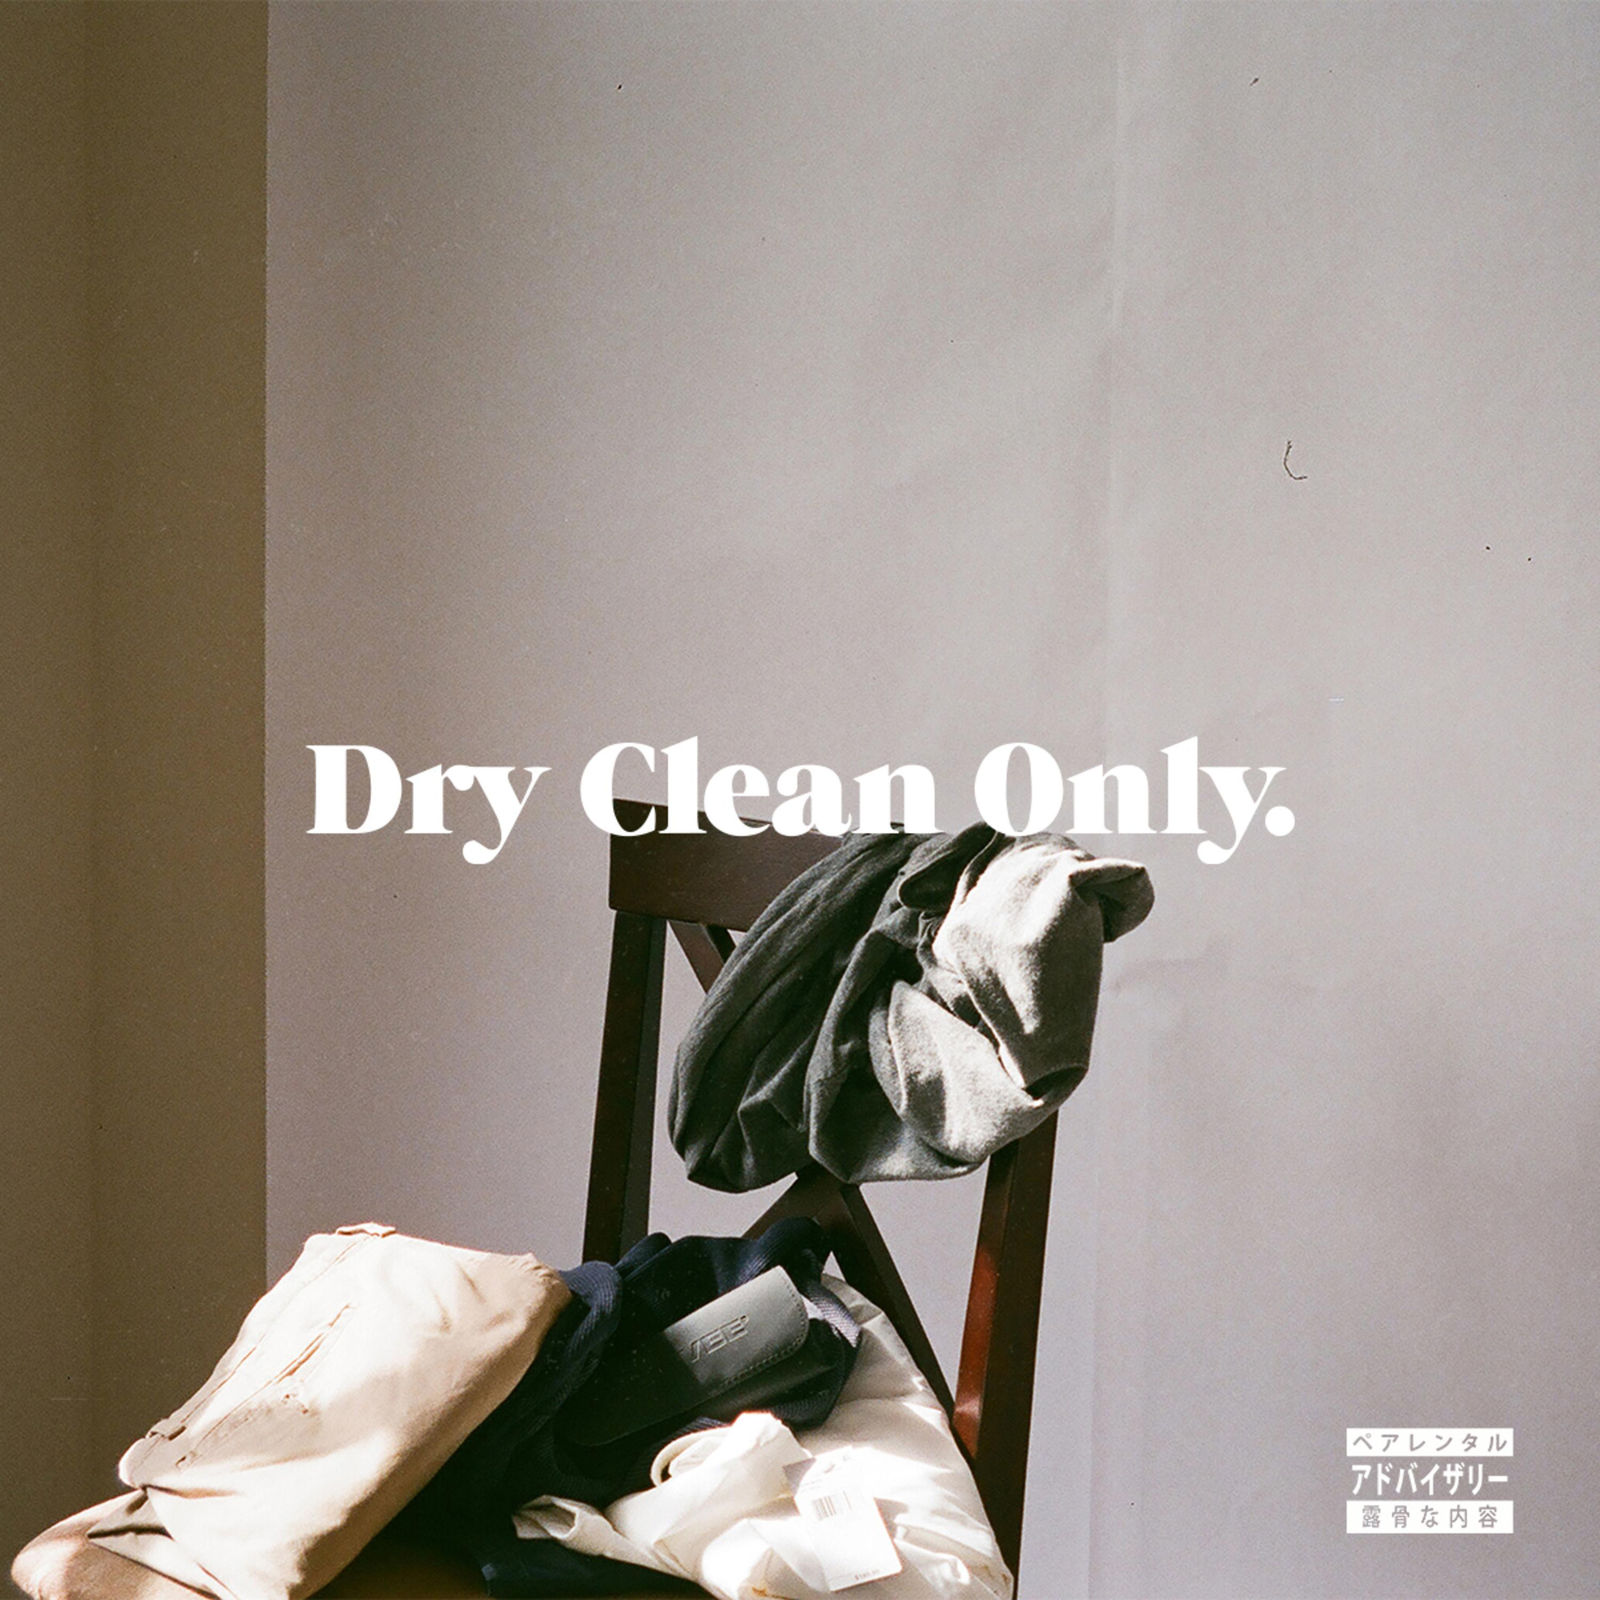 Dry Clean Only.